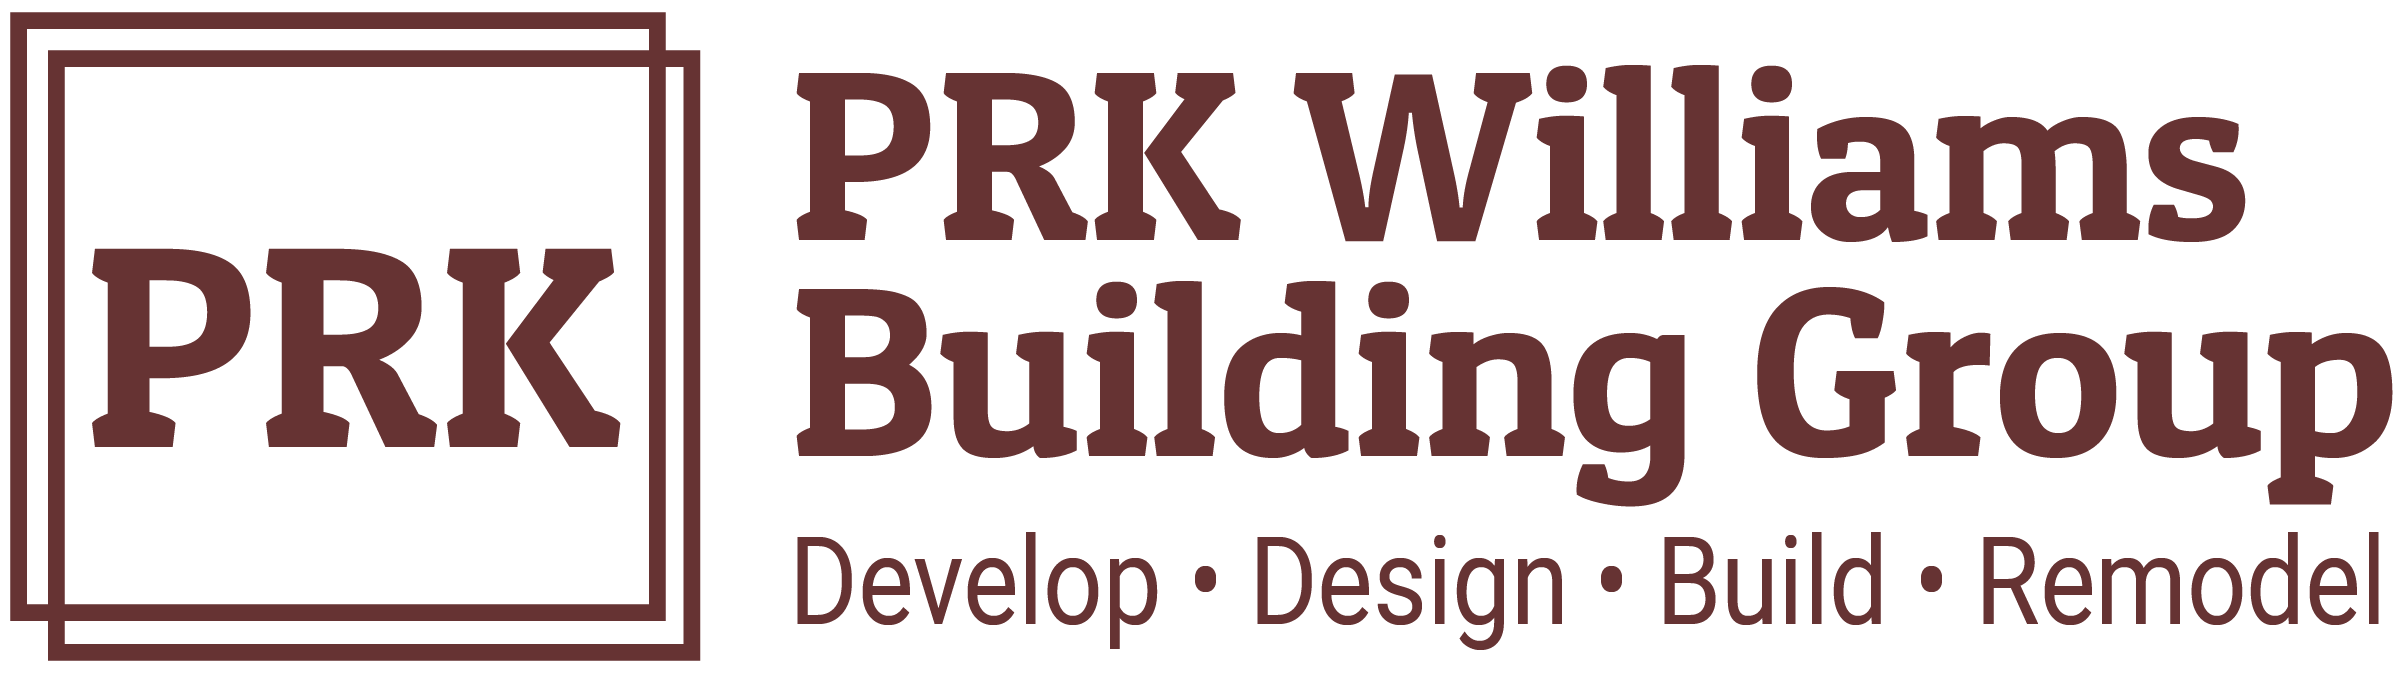 PRK Williams Building Group